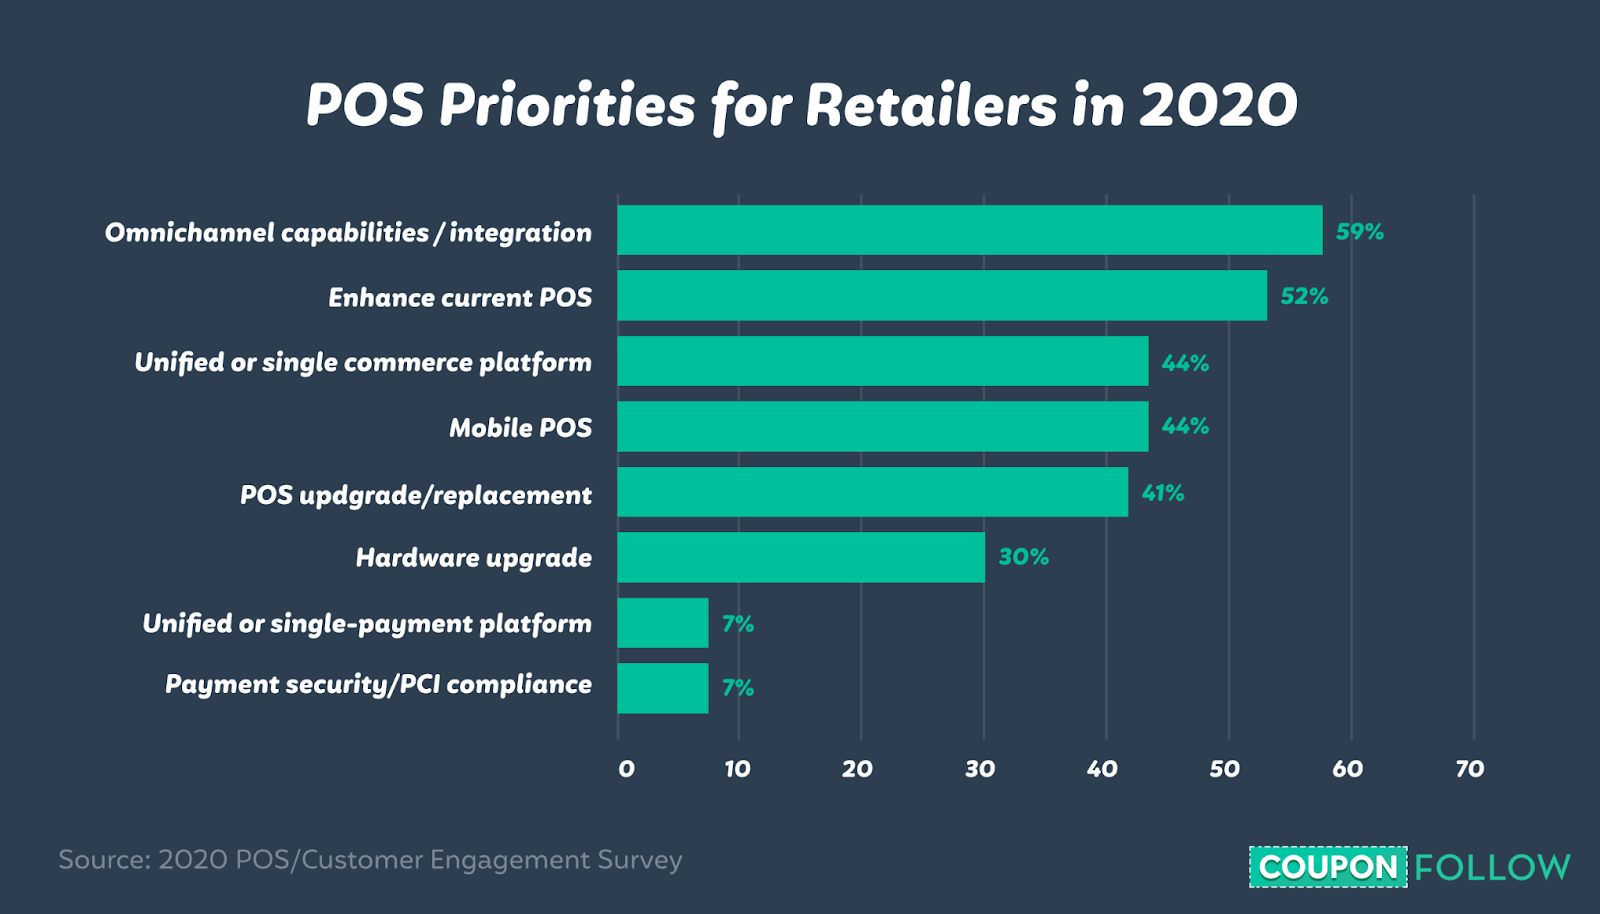 Graph showing POS priorities for retailers by percentage